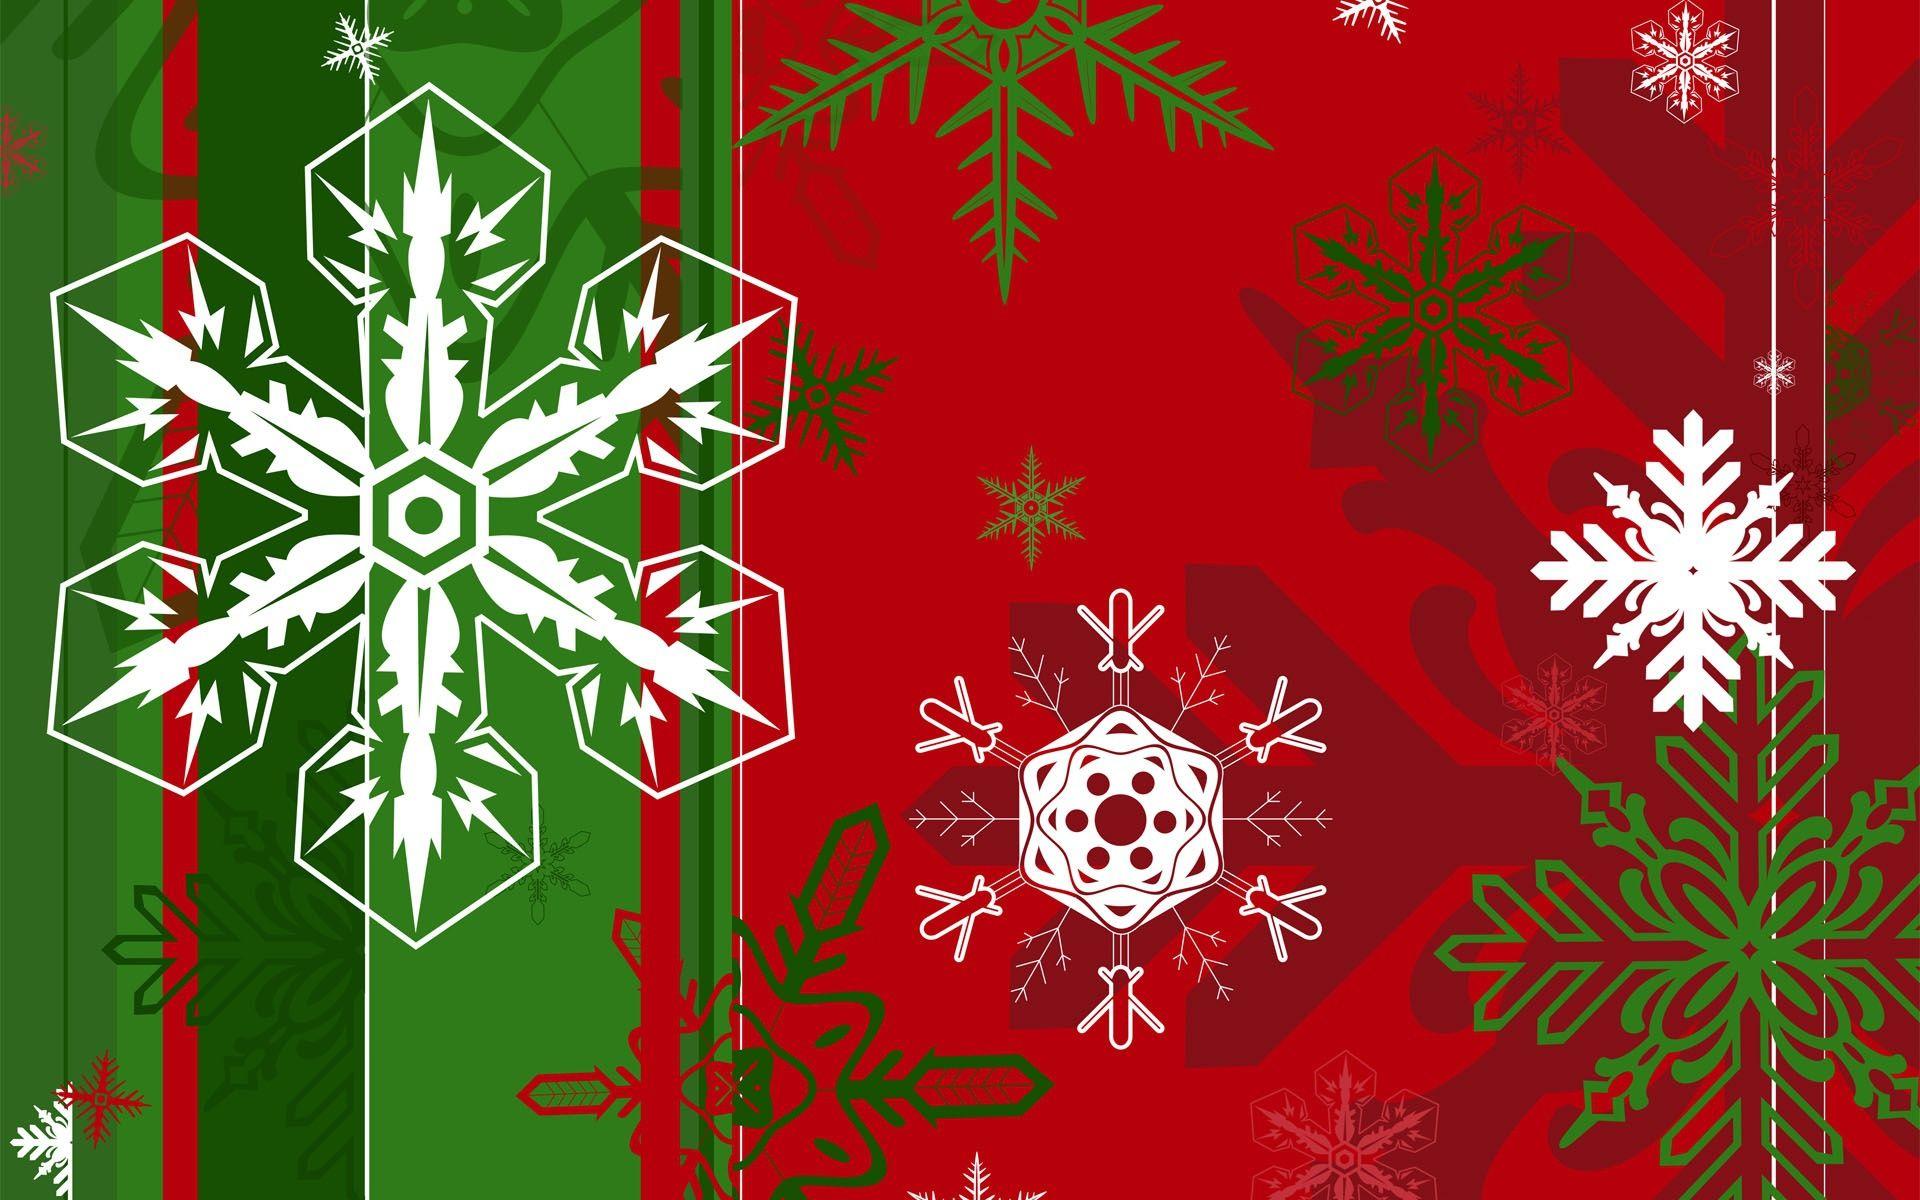 Snowflakes of different shapes on the green and red background